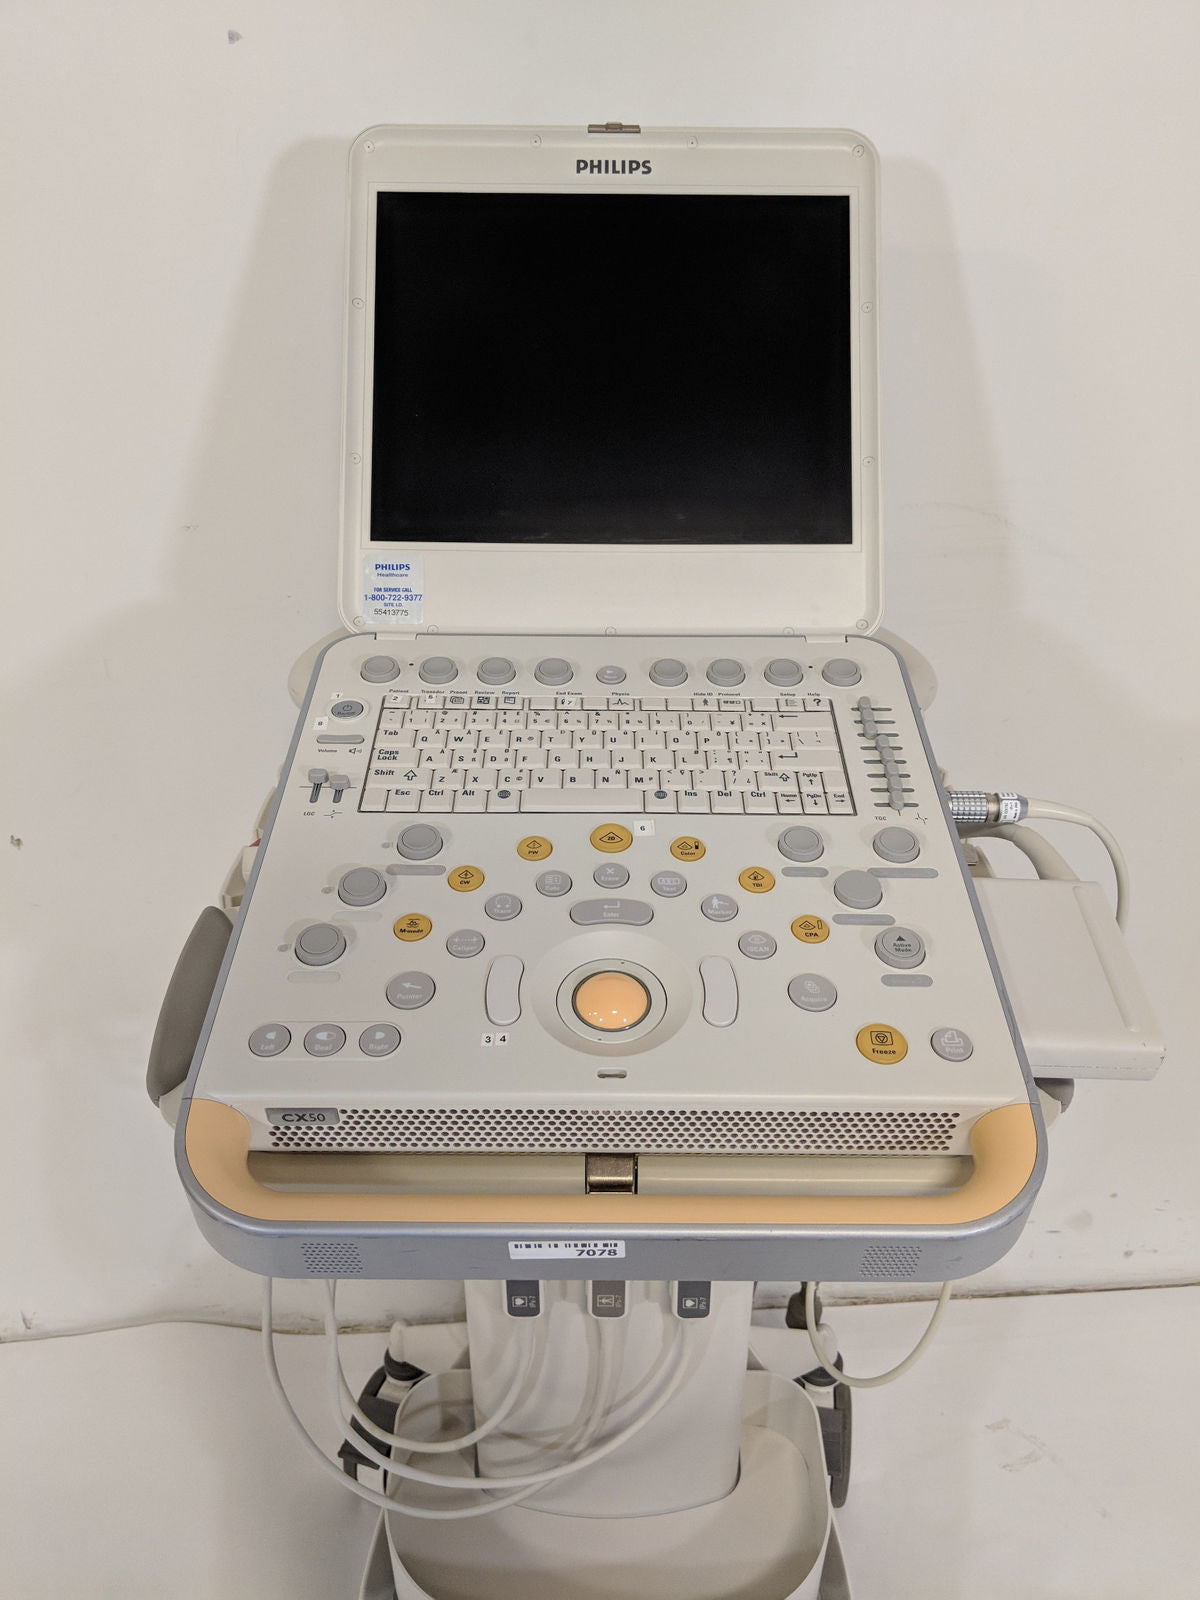 Philips CX50 Portable Ultrasound System - S8-3 S5-1 S12-4 Transducers - MFG 2015